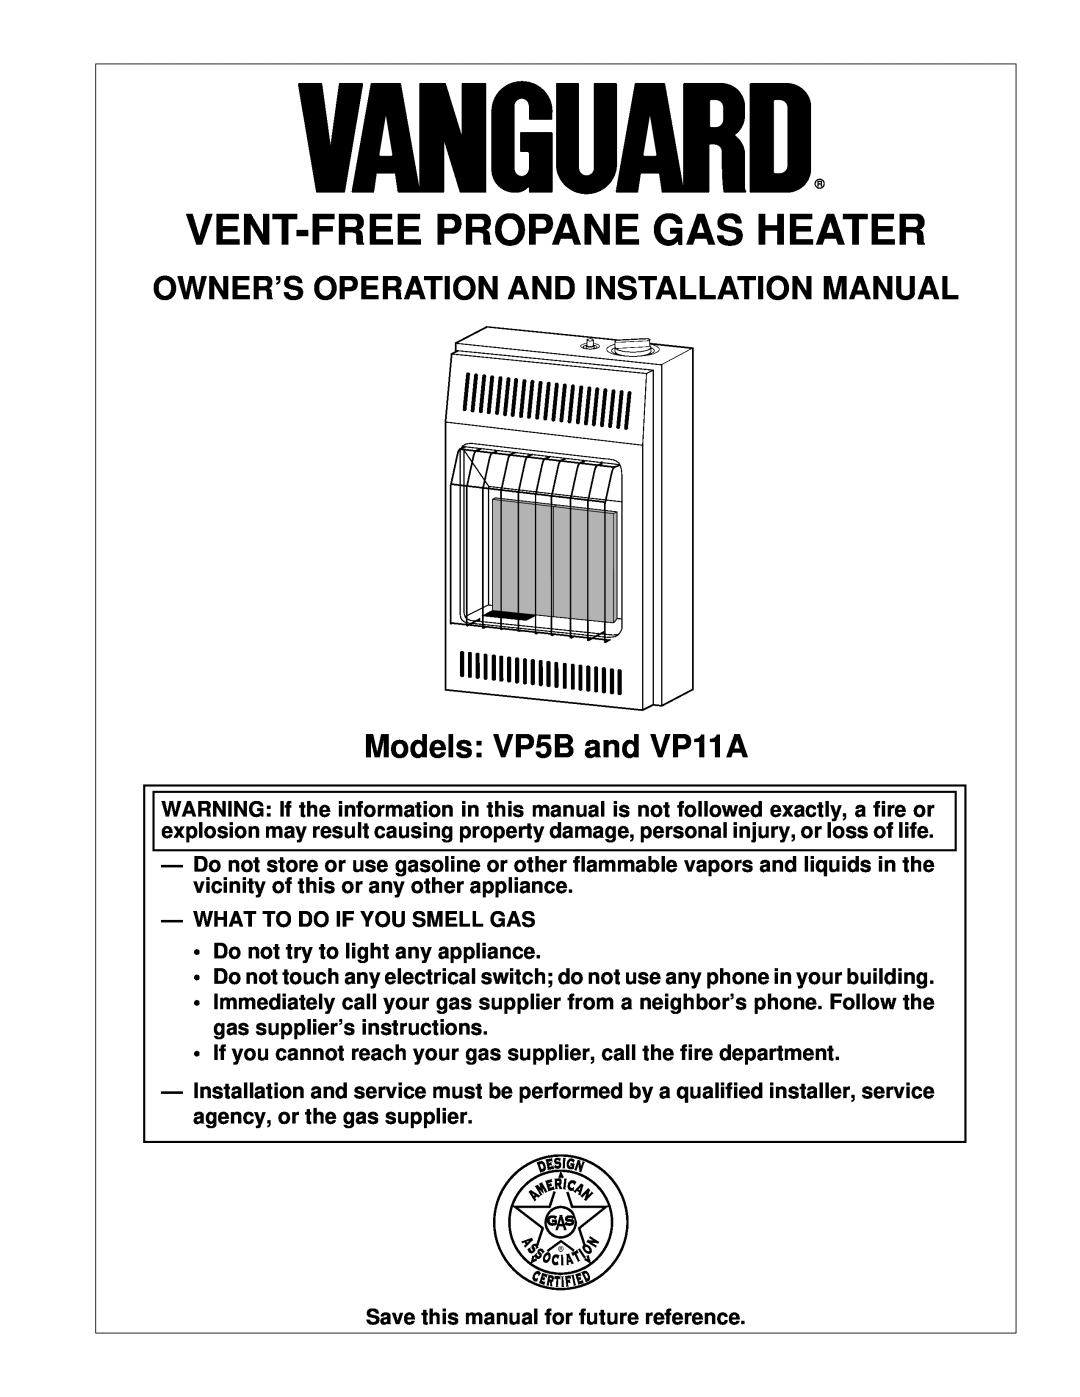 Desa installation manual OWNER’S OPERATION AND INSTALLATION MANUAL Models VP5B and VP11A, Vent-Free Propane Gas Heater 